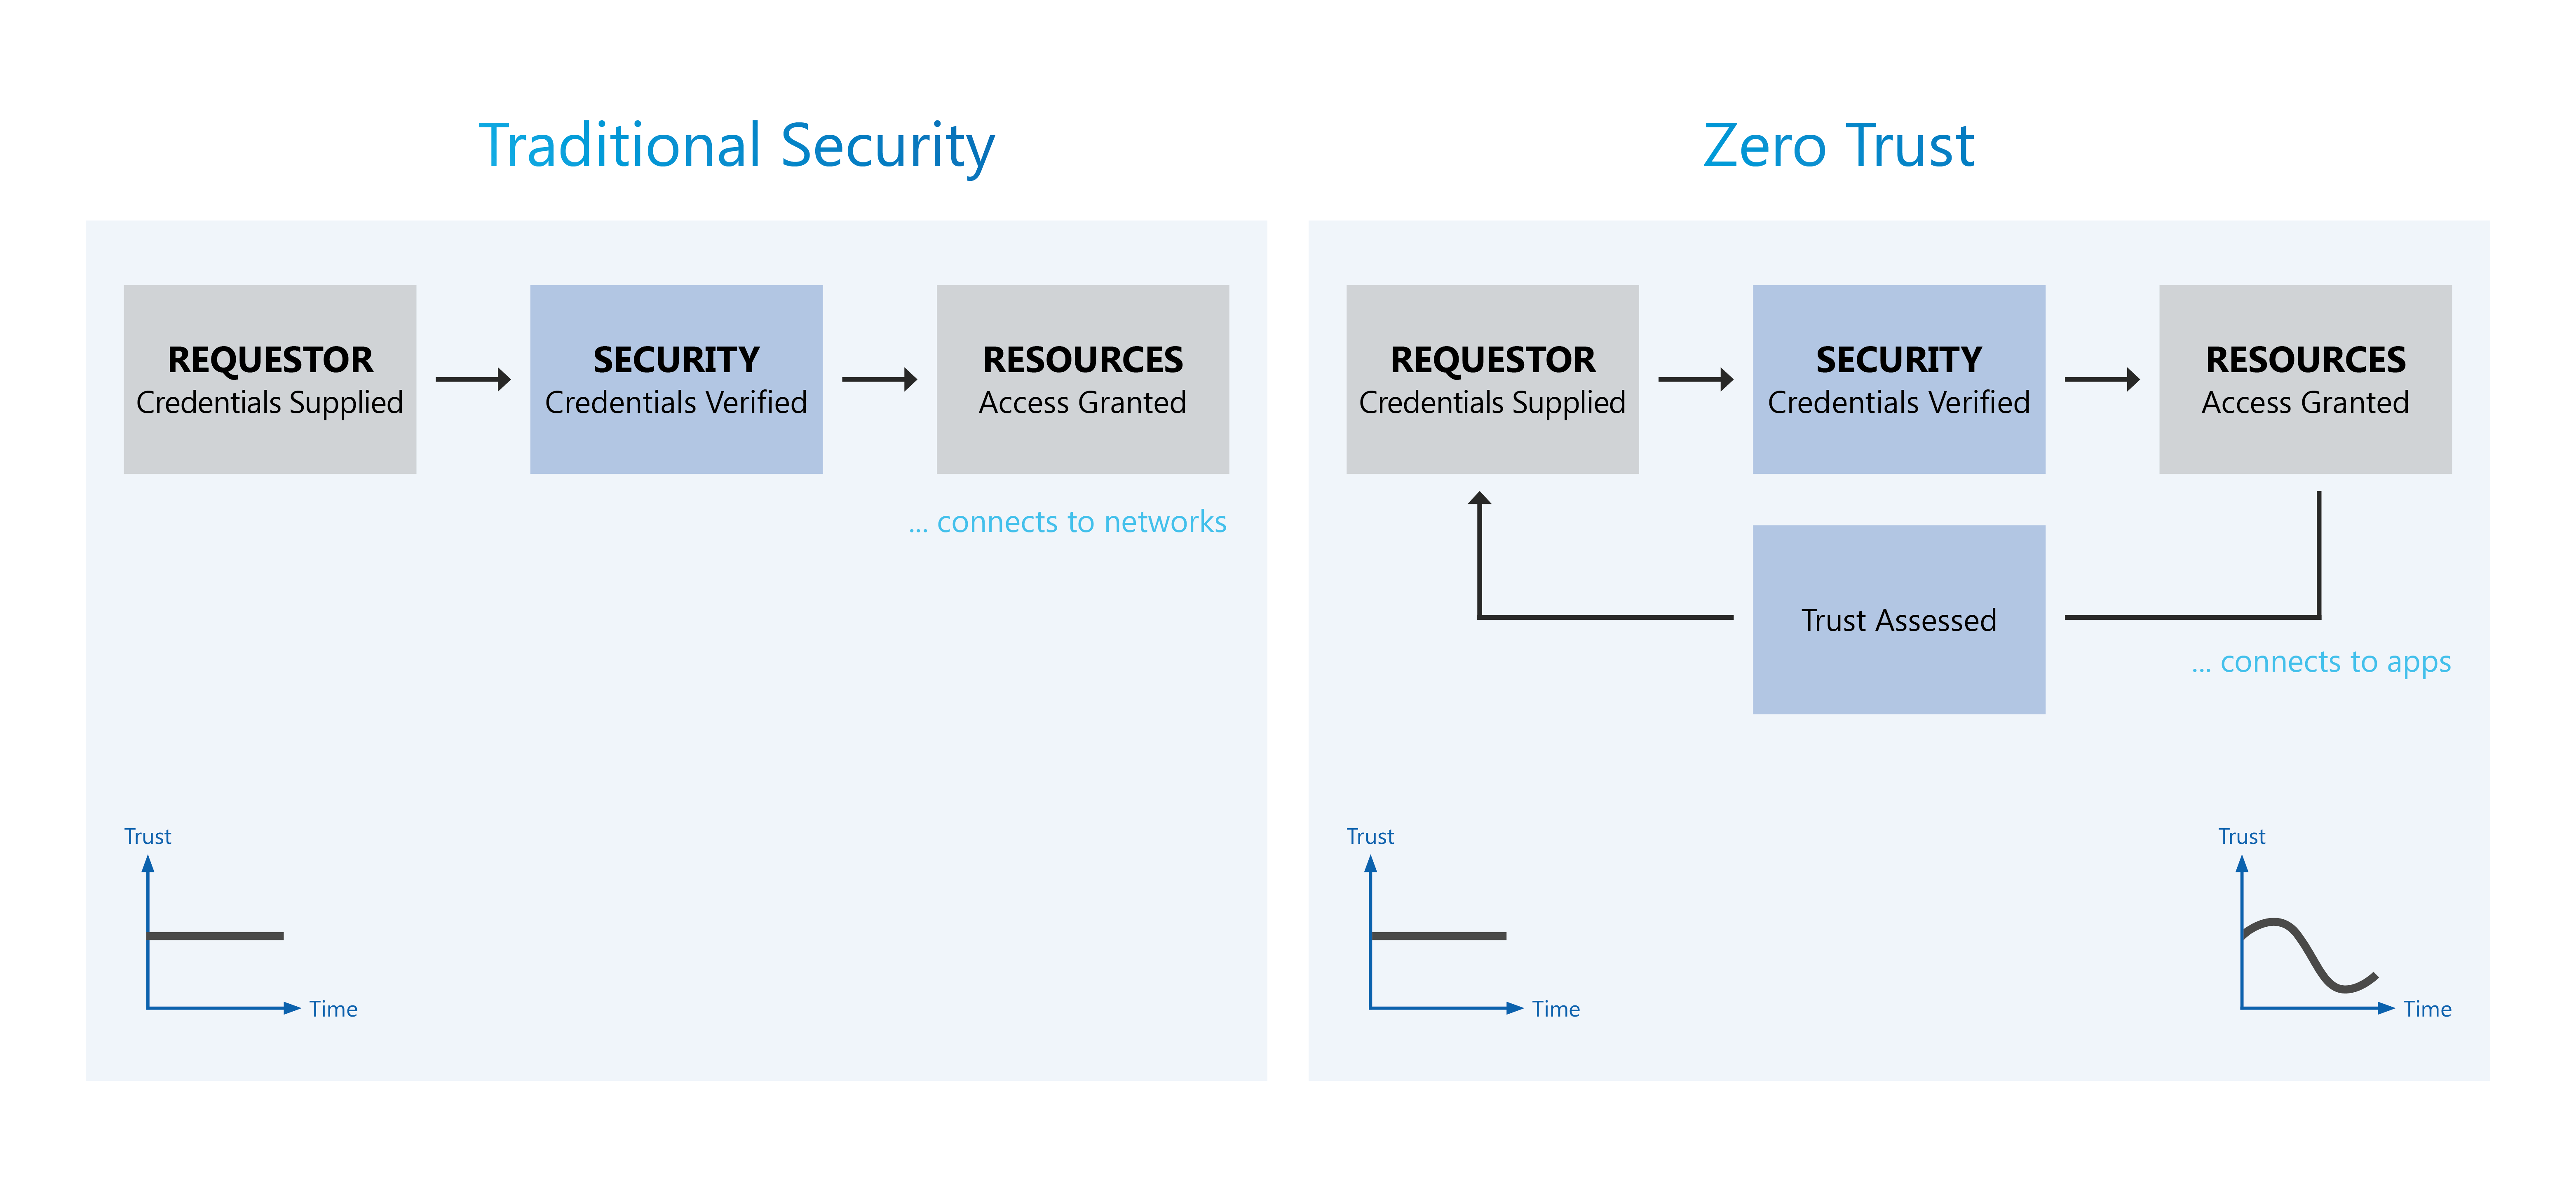 Fig 5: Differences between a traditional security approach and Zero Trust framework.